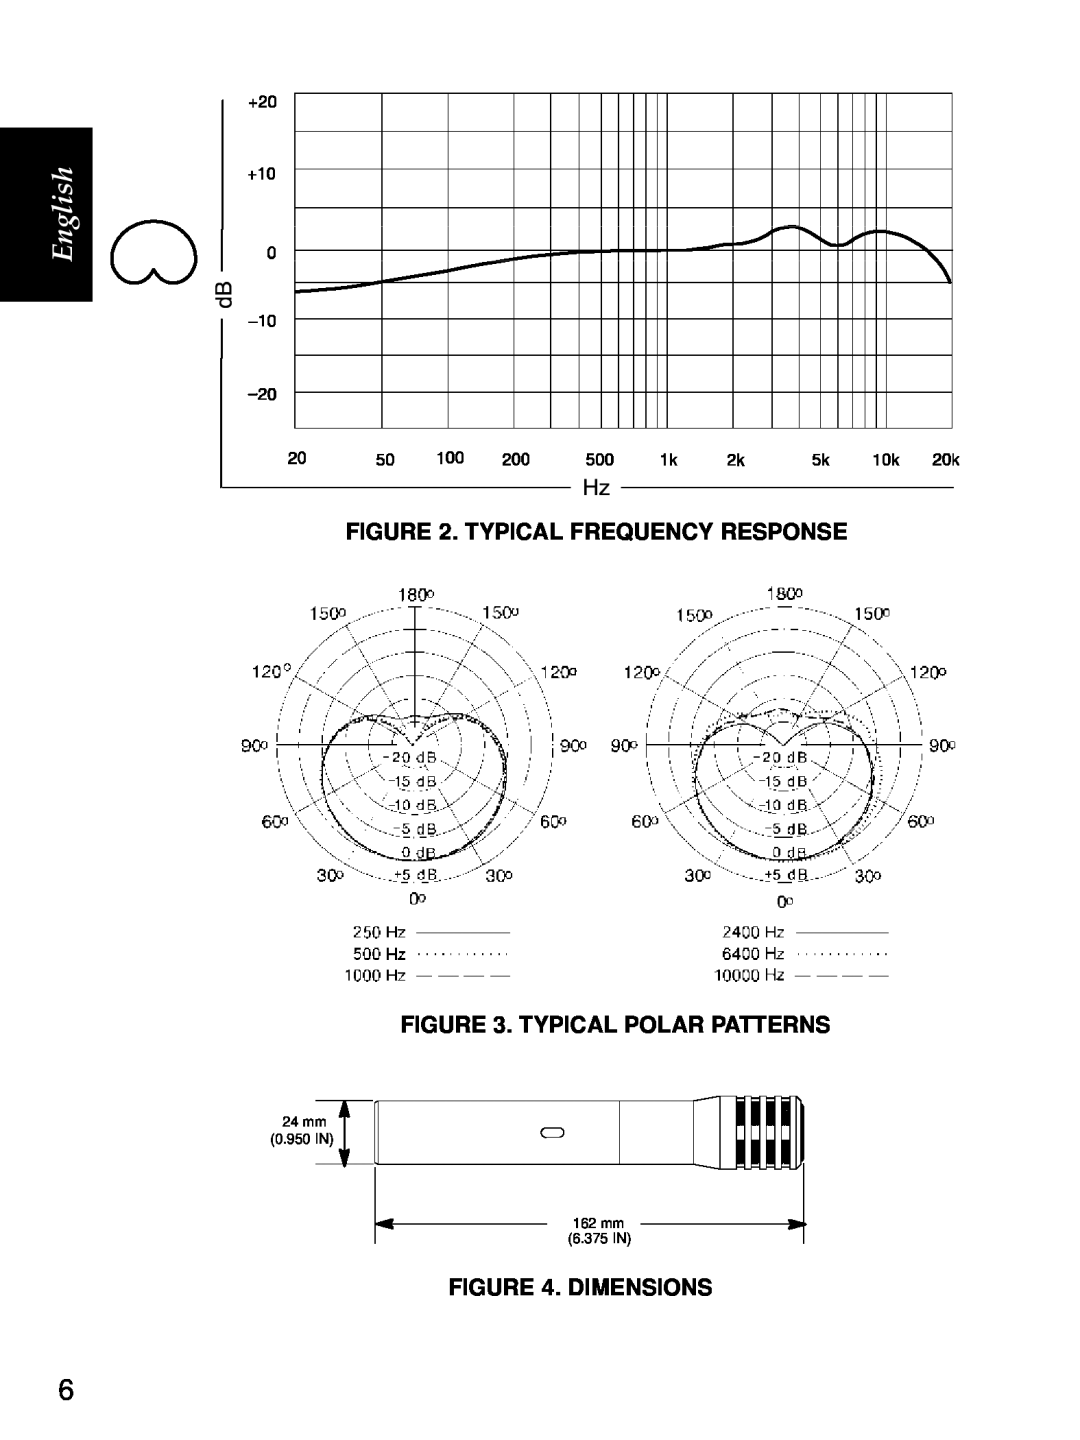 Shure KSM109 manual Typical Frequency Response, Typical Polar Patterns, Dimensions, English, 24mm 0.950 IN 162 mm 6.375 IN 